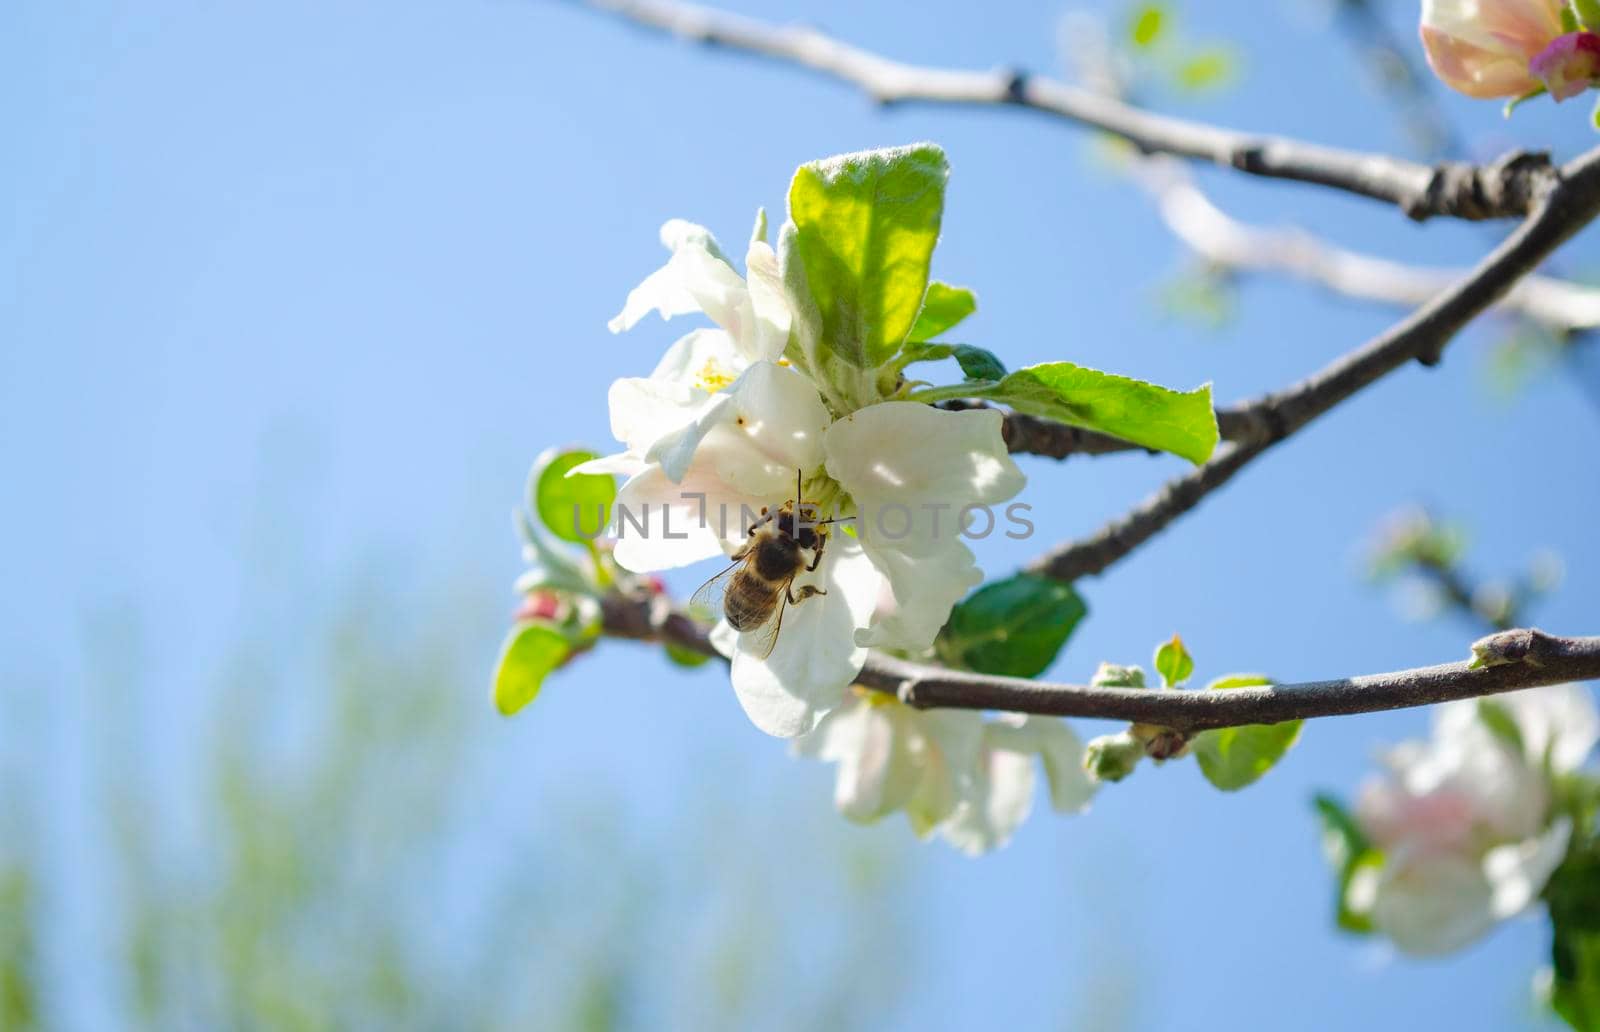 Spring flowering apple tree. Many blossoming white flowers on the branches of the tree. Spring agro concept